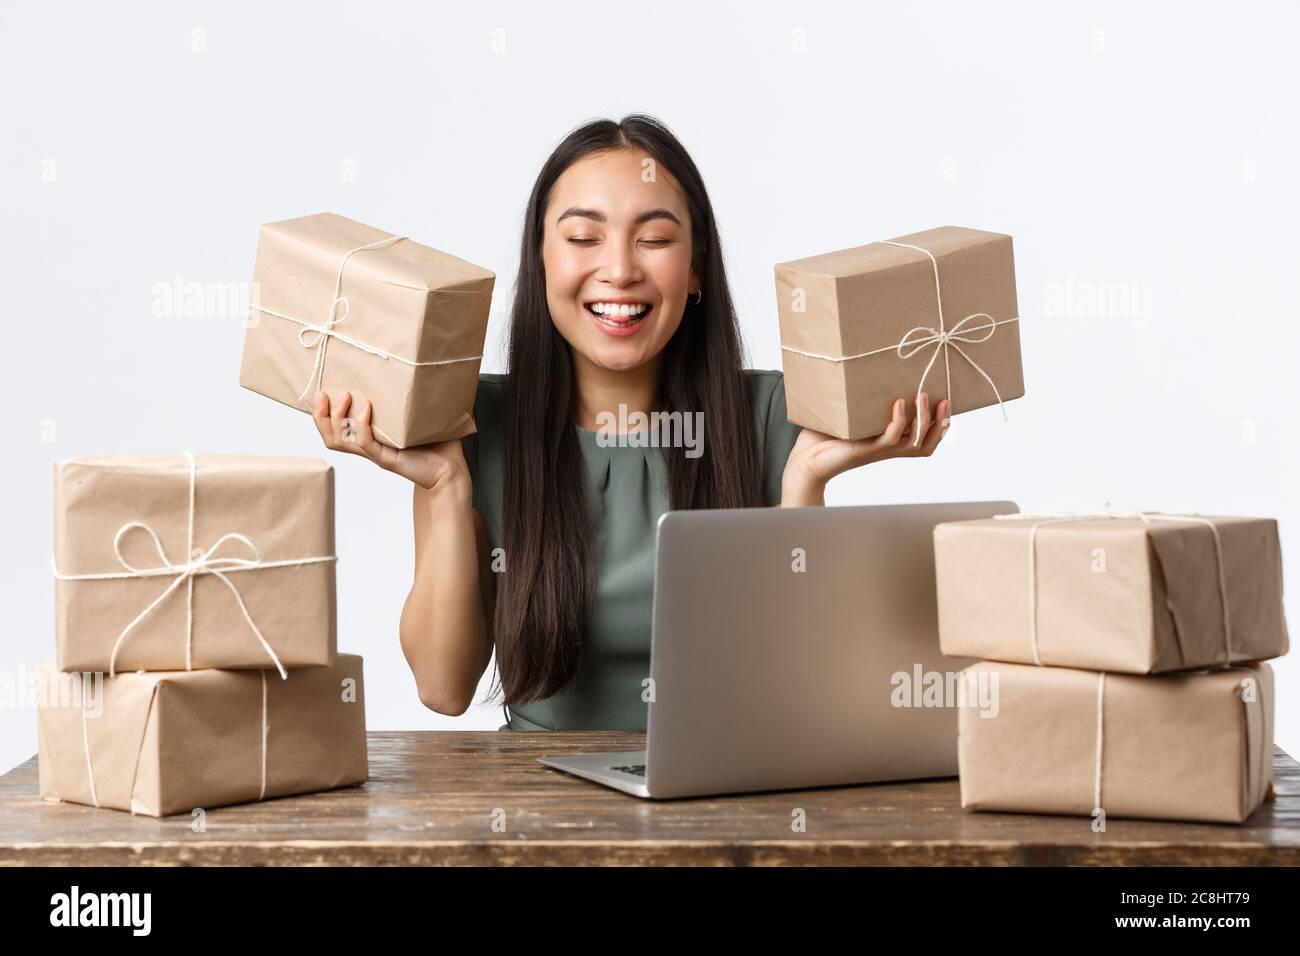 Small Business Owners Startup And E Commerce Concept Smiling Successful Shop Manager Businesswoman With Internet Store Packing Client Order For Stock Photo Alamy